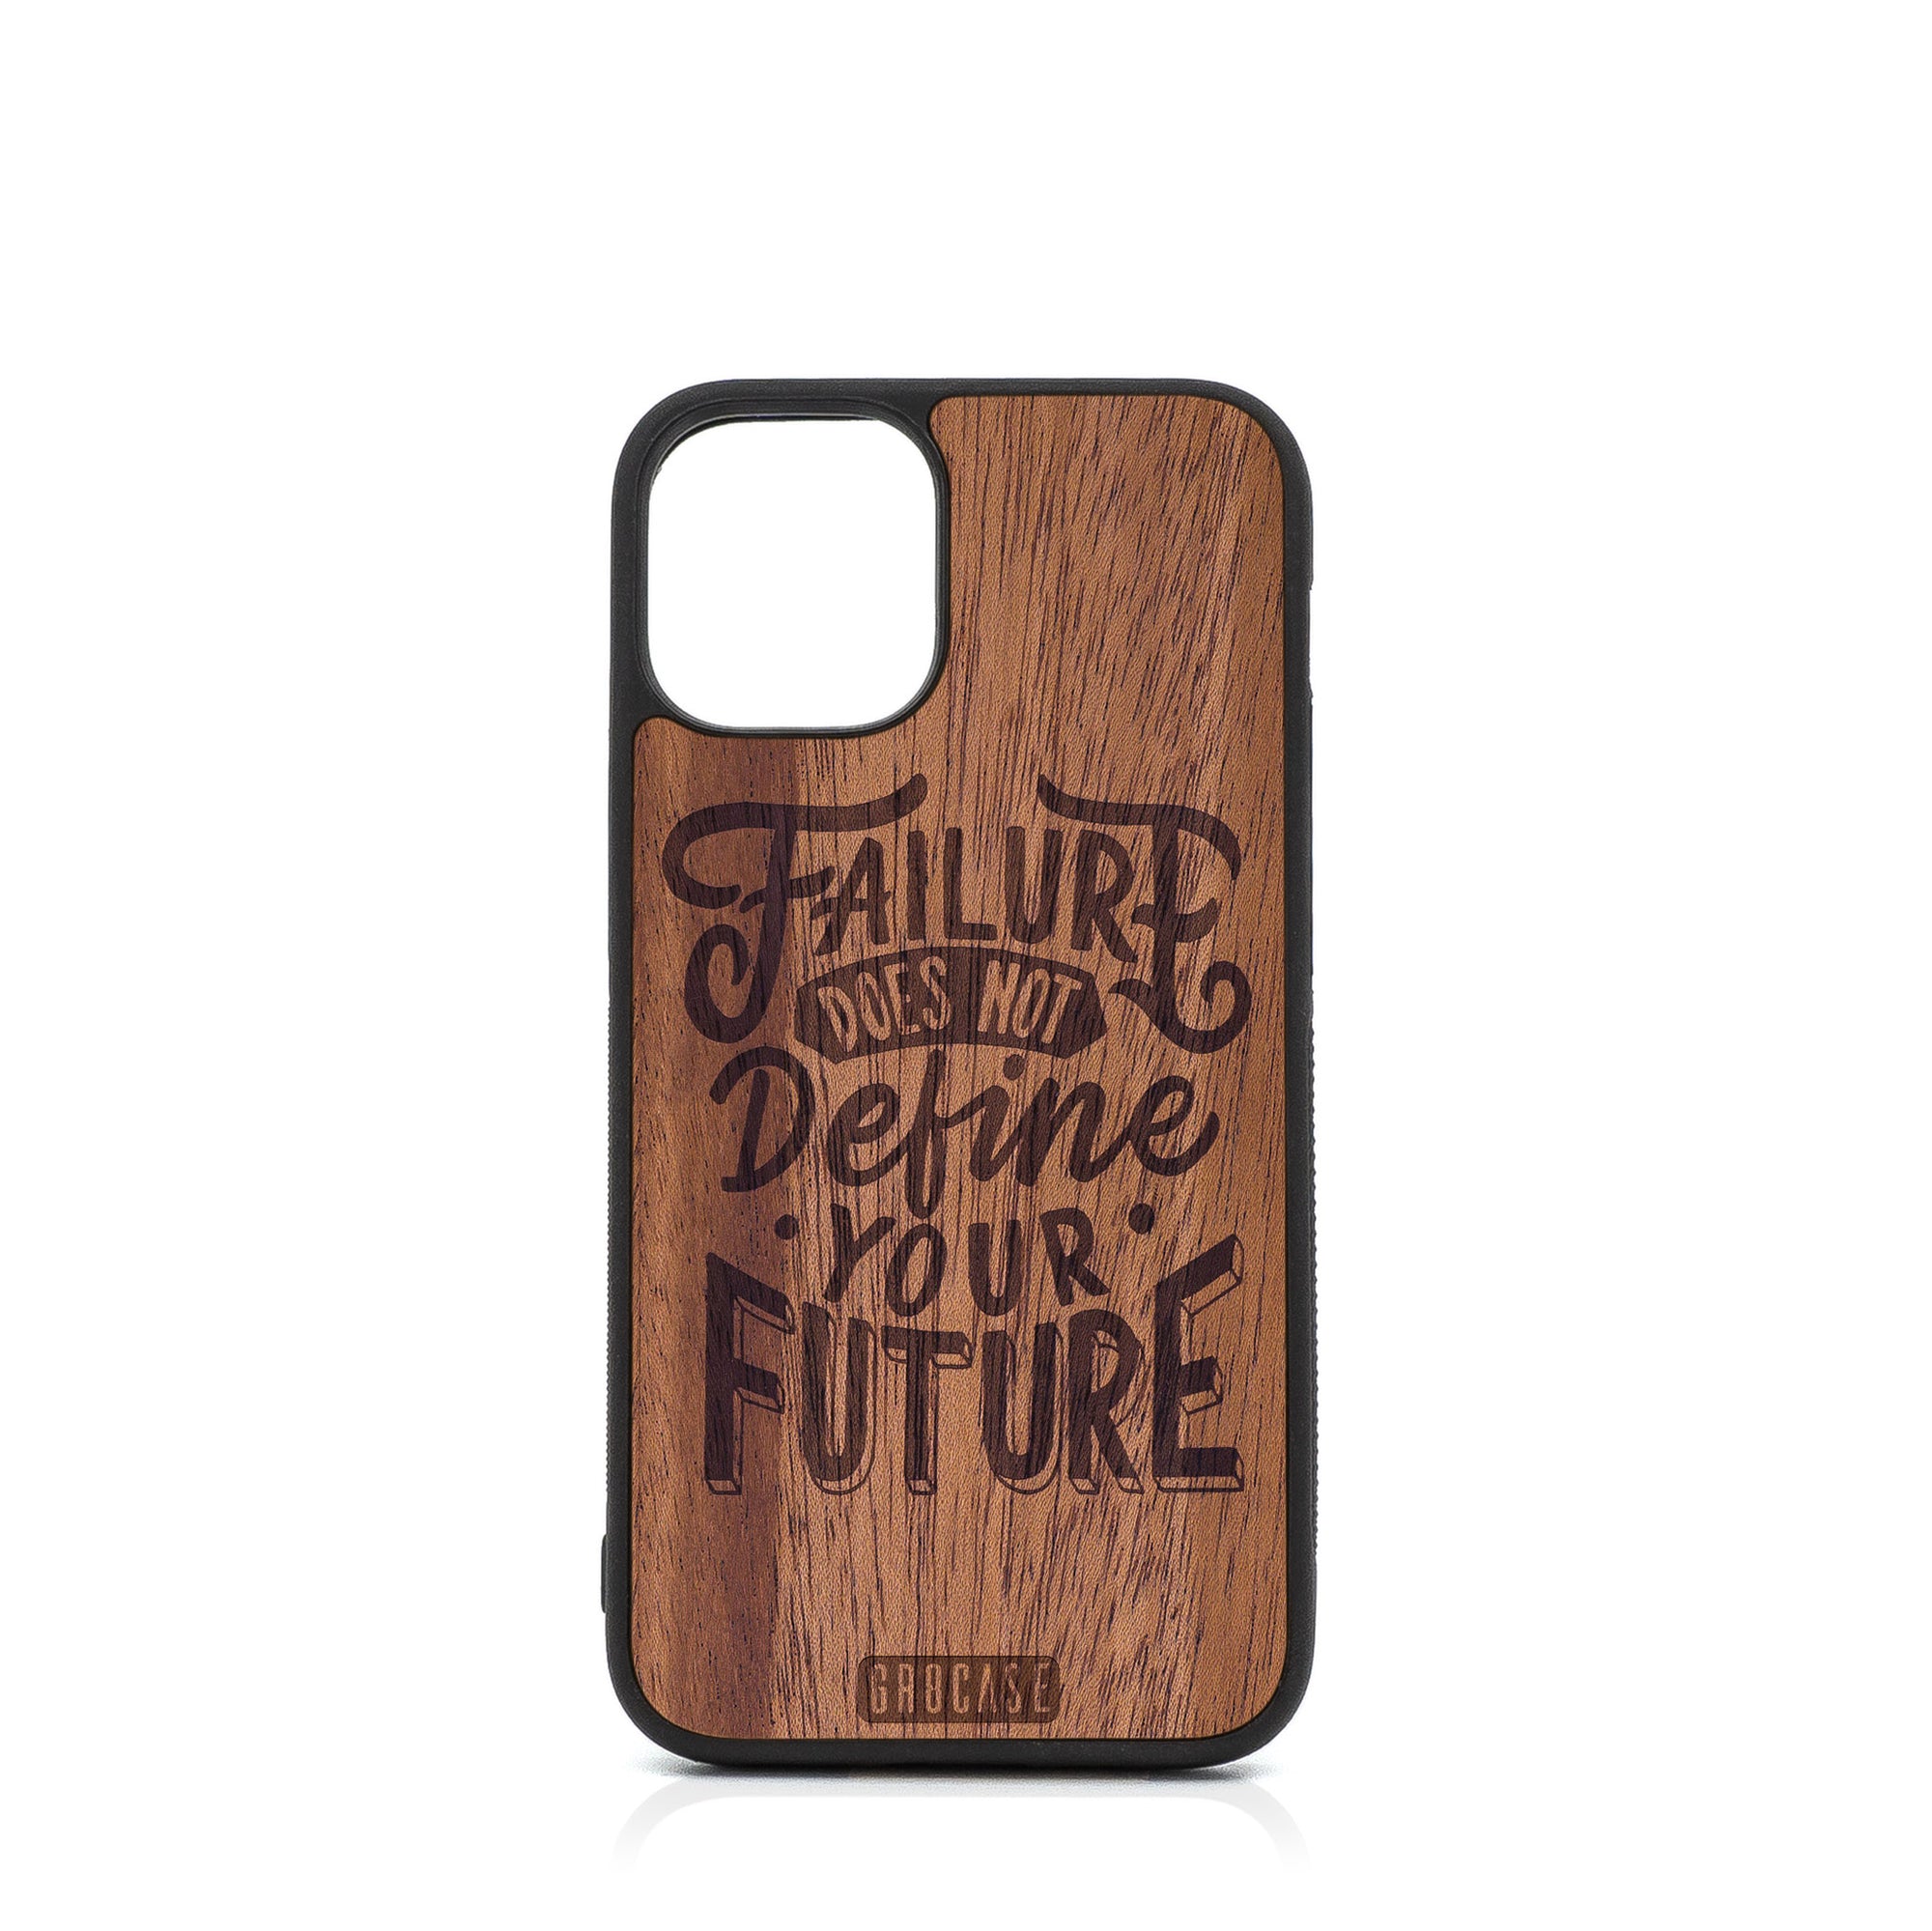 Failure Does Not Define Your Future Design Wood Case For iPhone 12 Mini